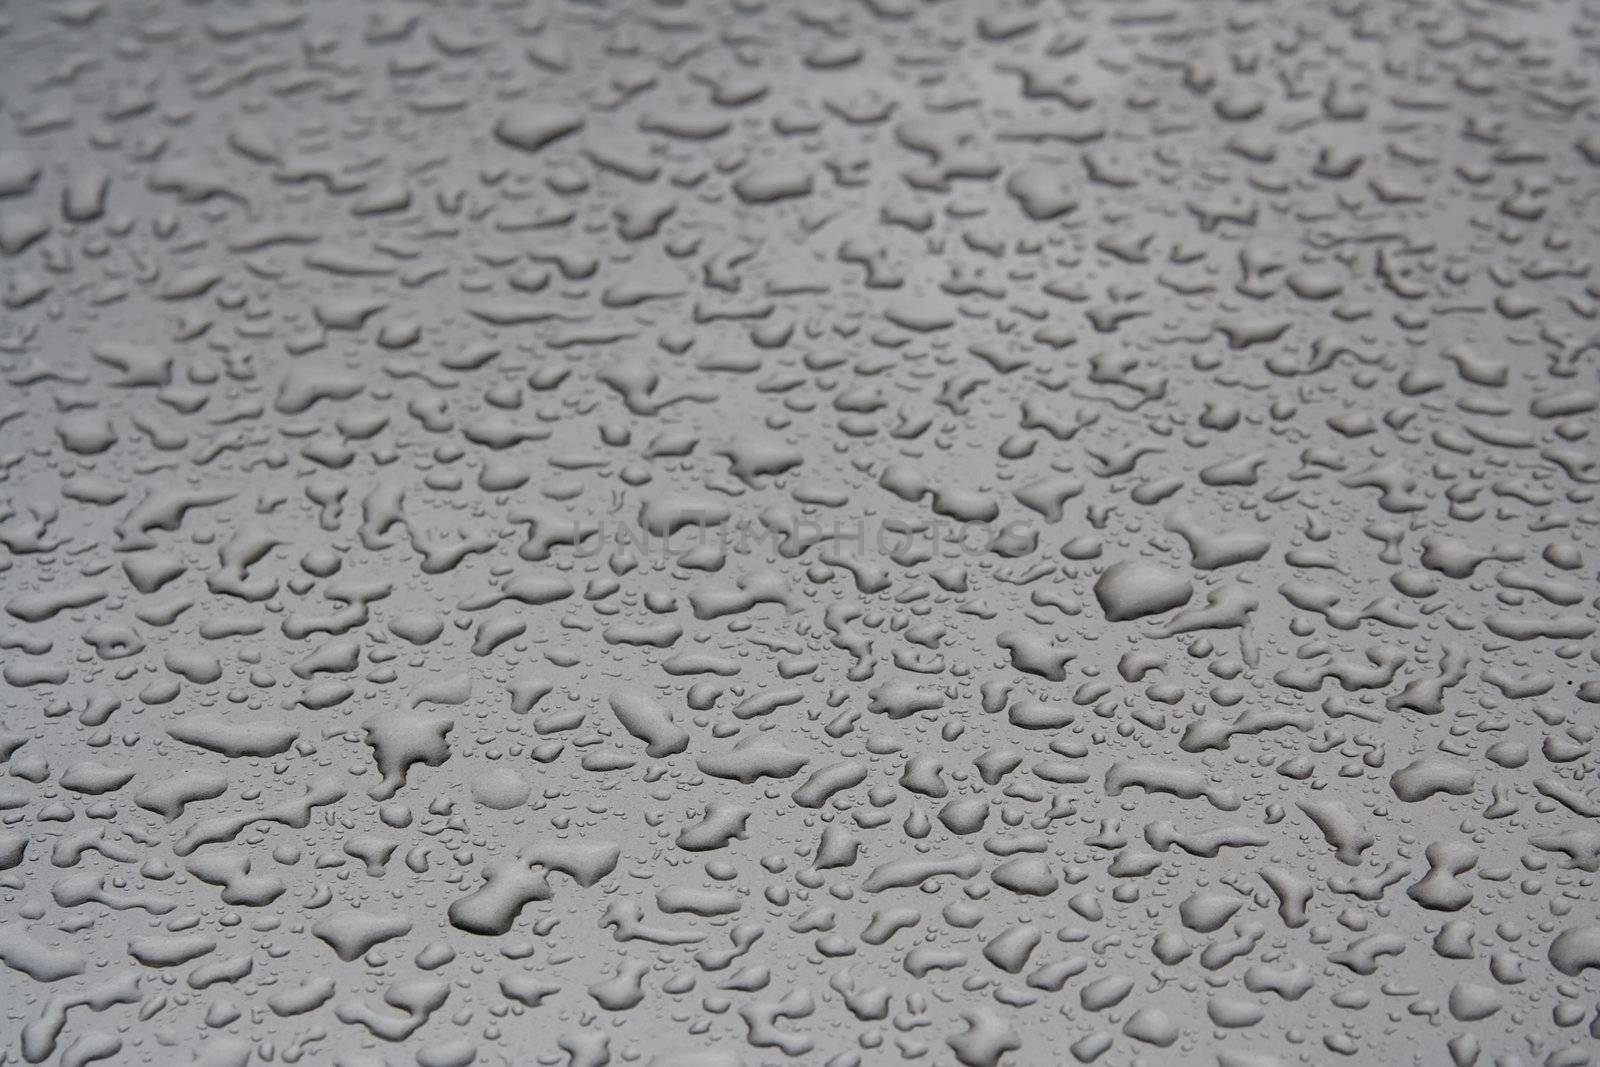 Water Droplets on a Steel Surface. Close-up